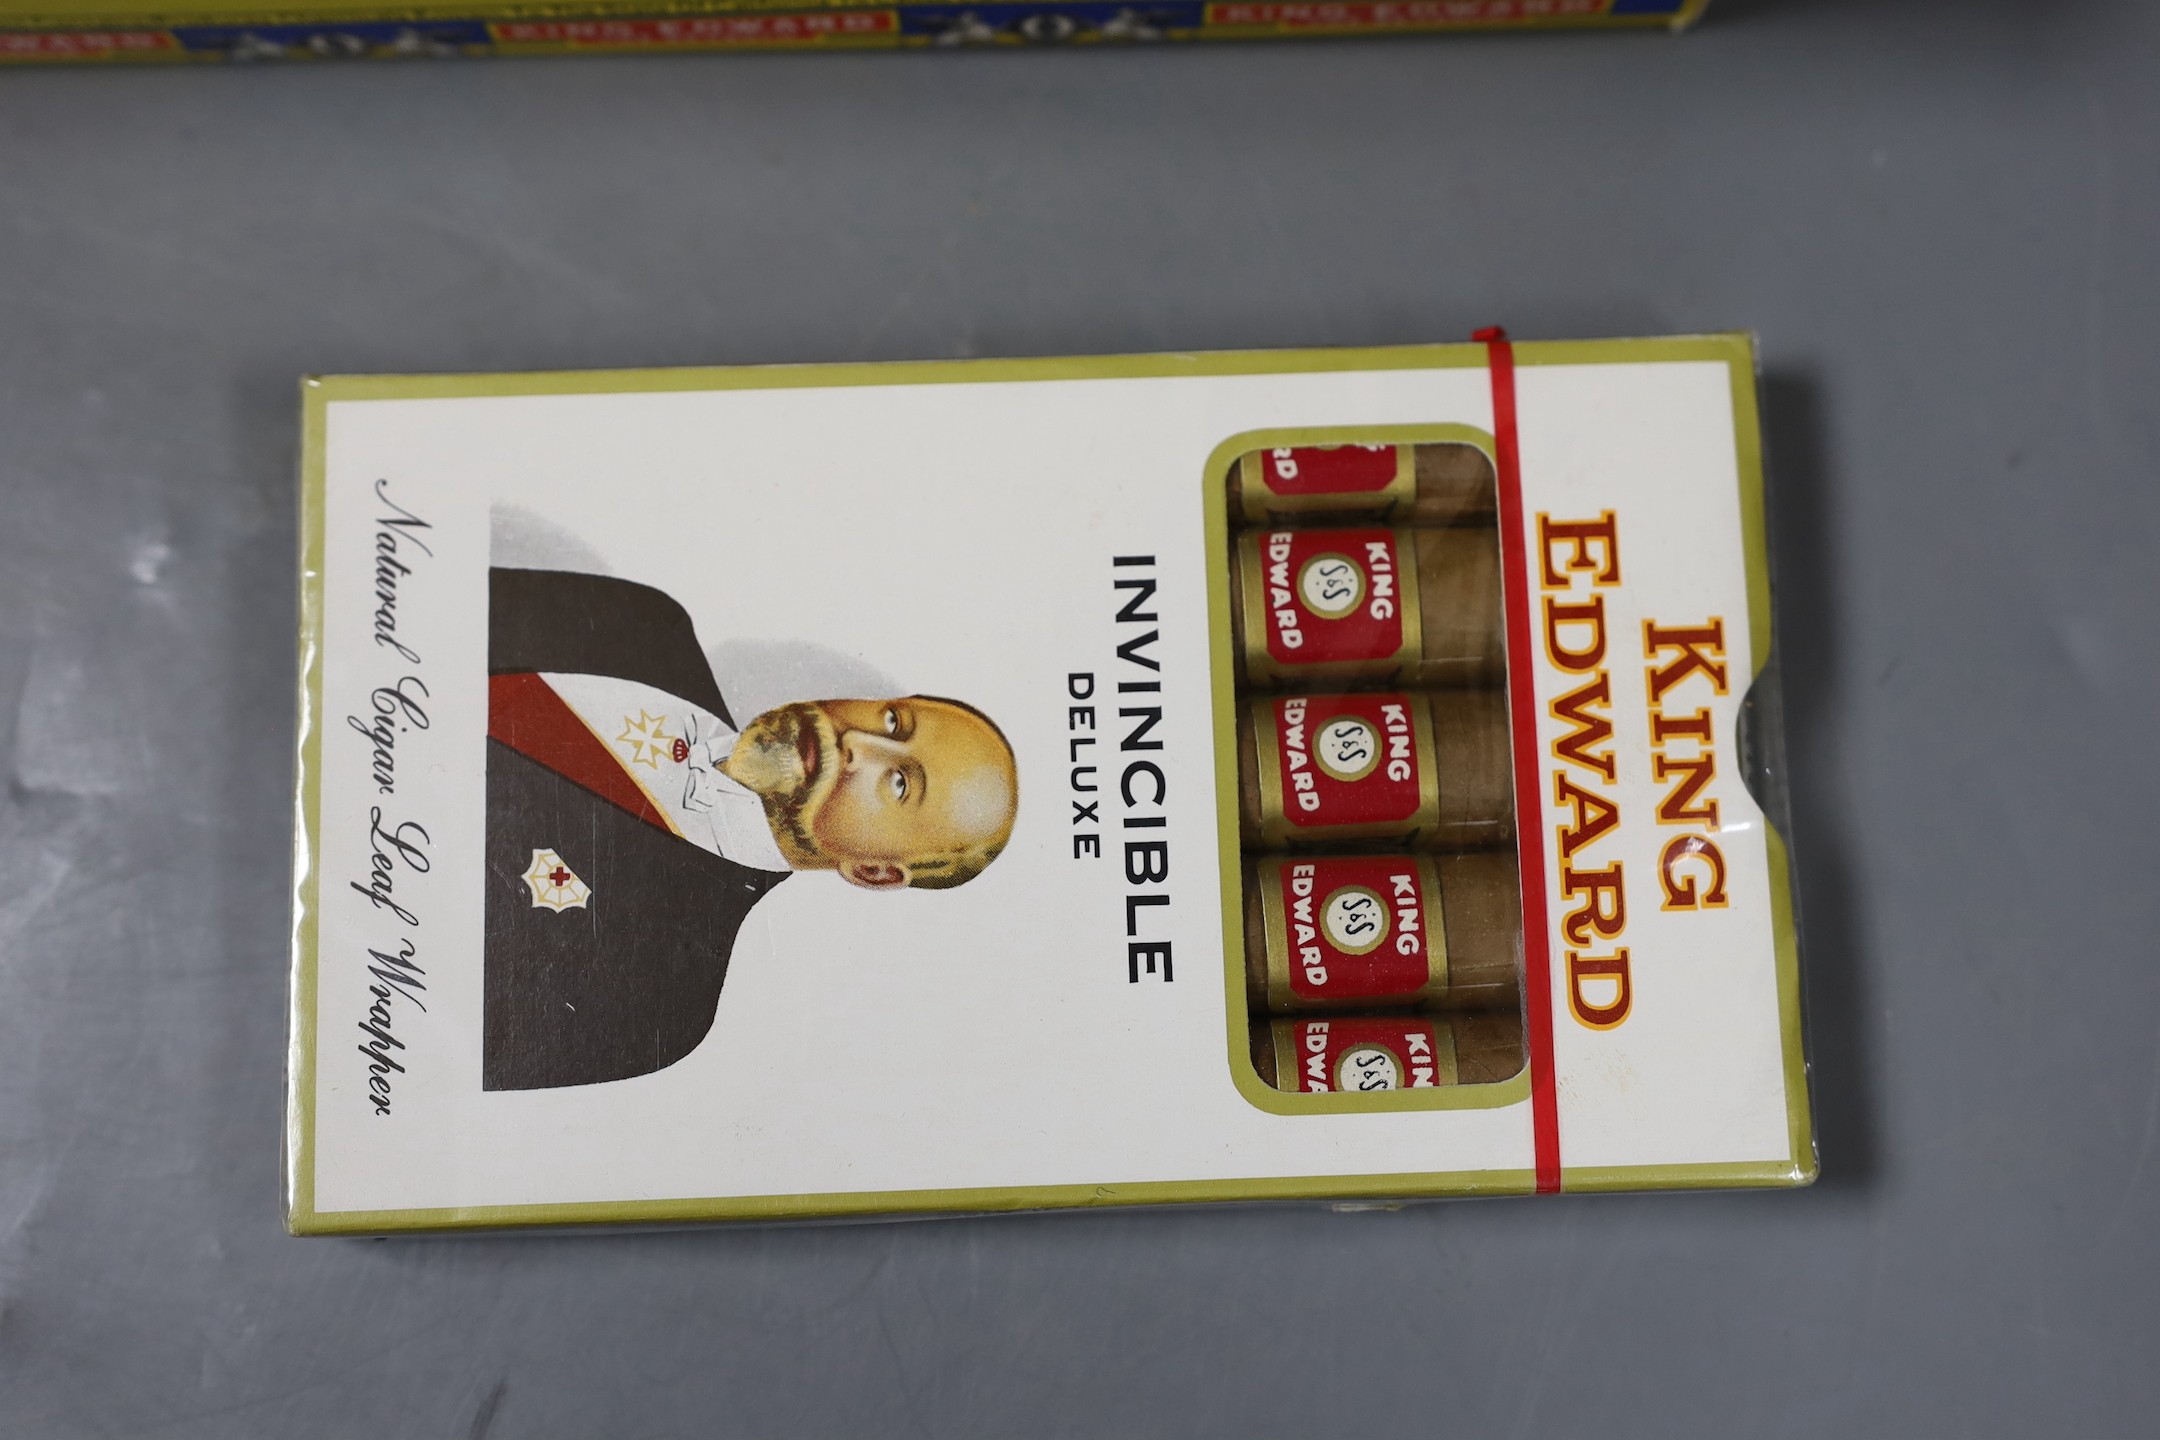 A group of 50 King Edward the Seventh Imperial Mild Tobaccos cigars